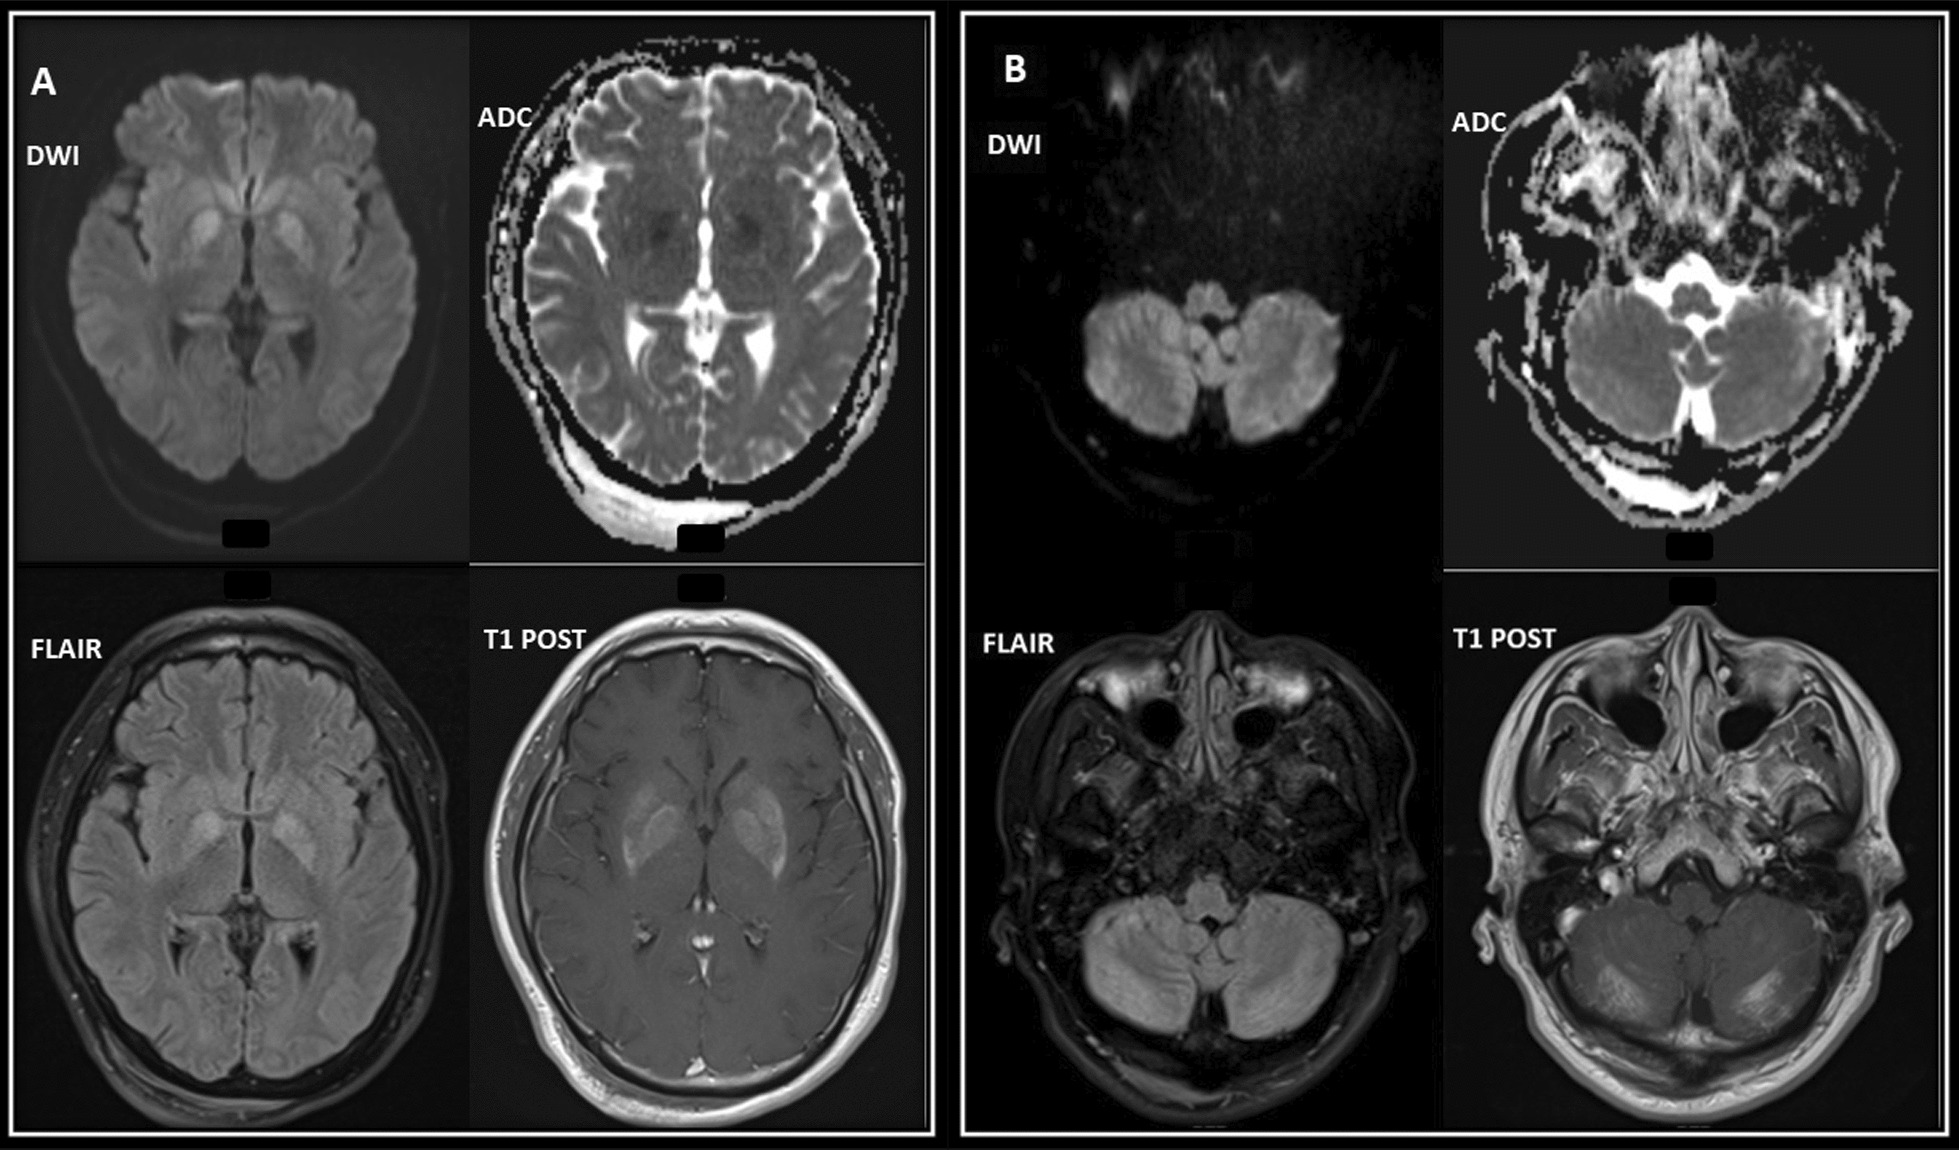 New-onset seizures misdiagnosed as psychogenic non-epileptic seizures: a case of paraneoplastic limbic encephalitis with primary testicular cancer